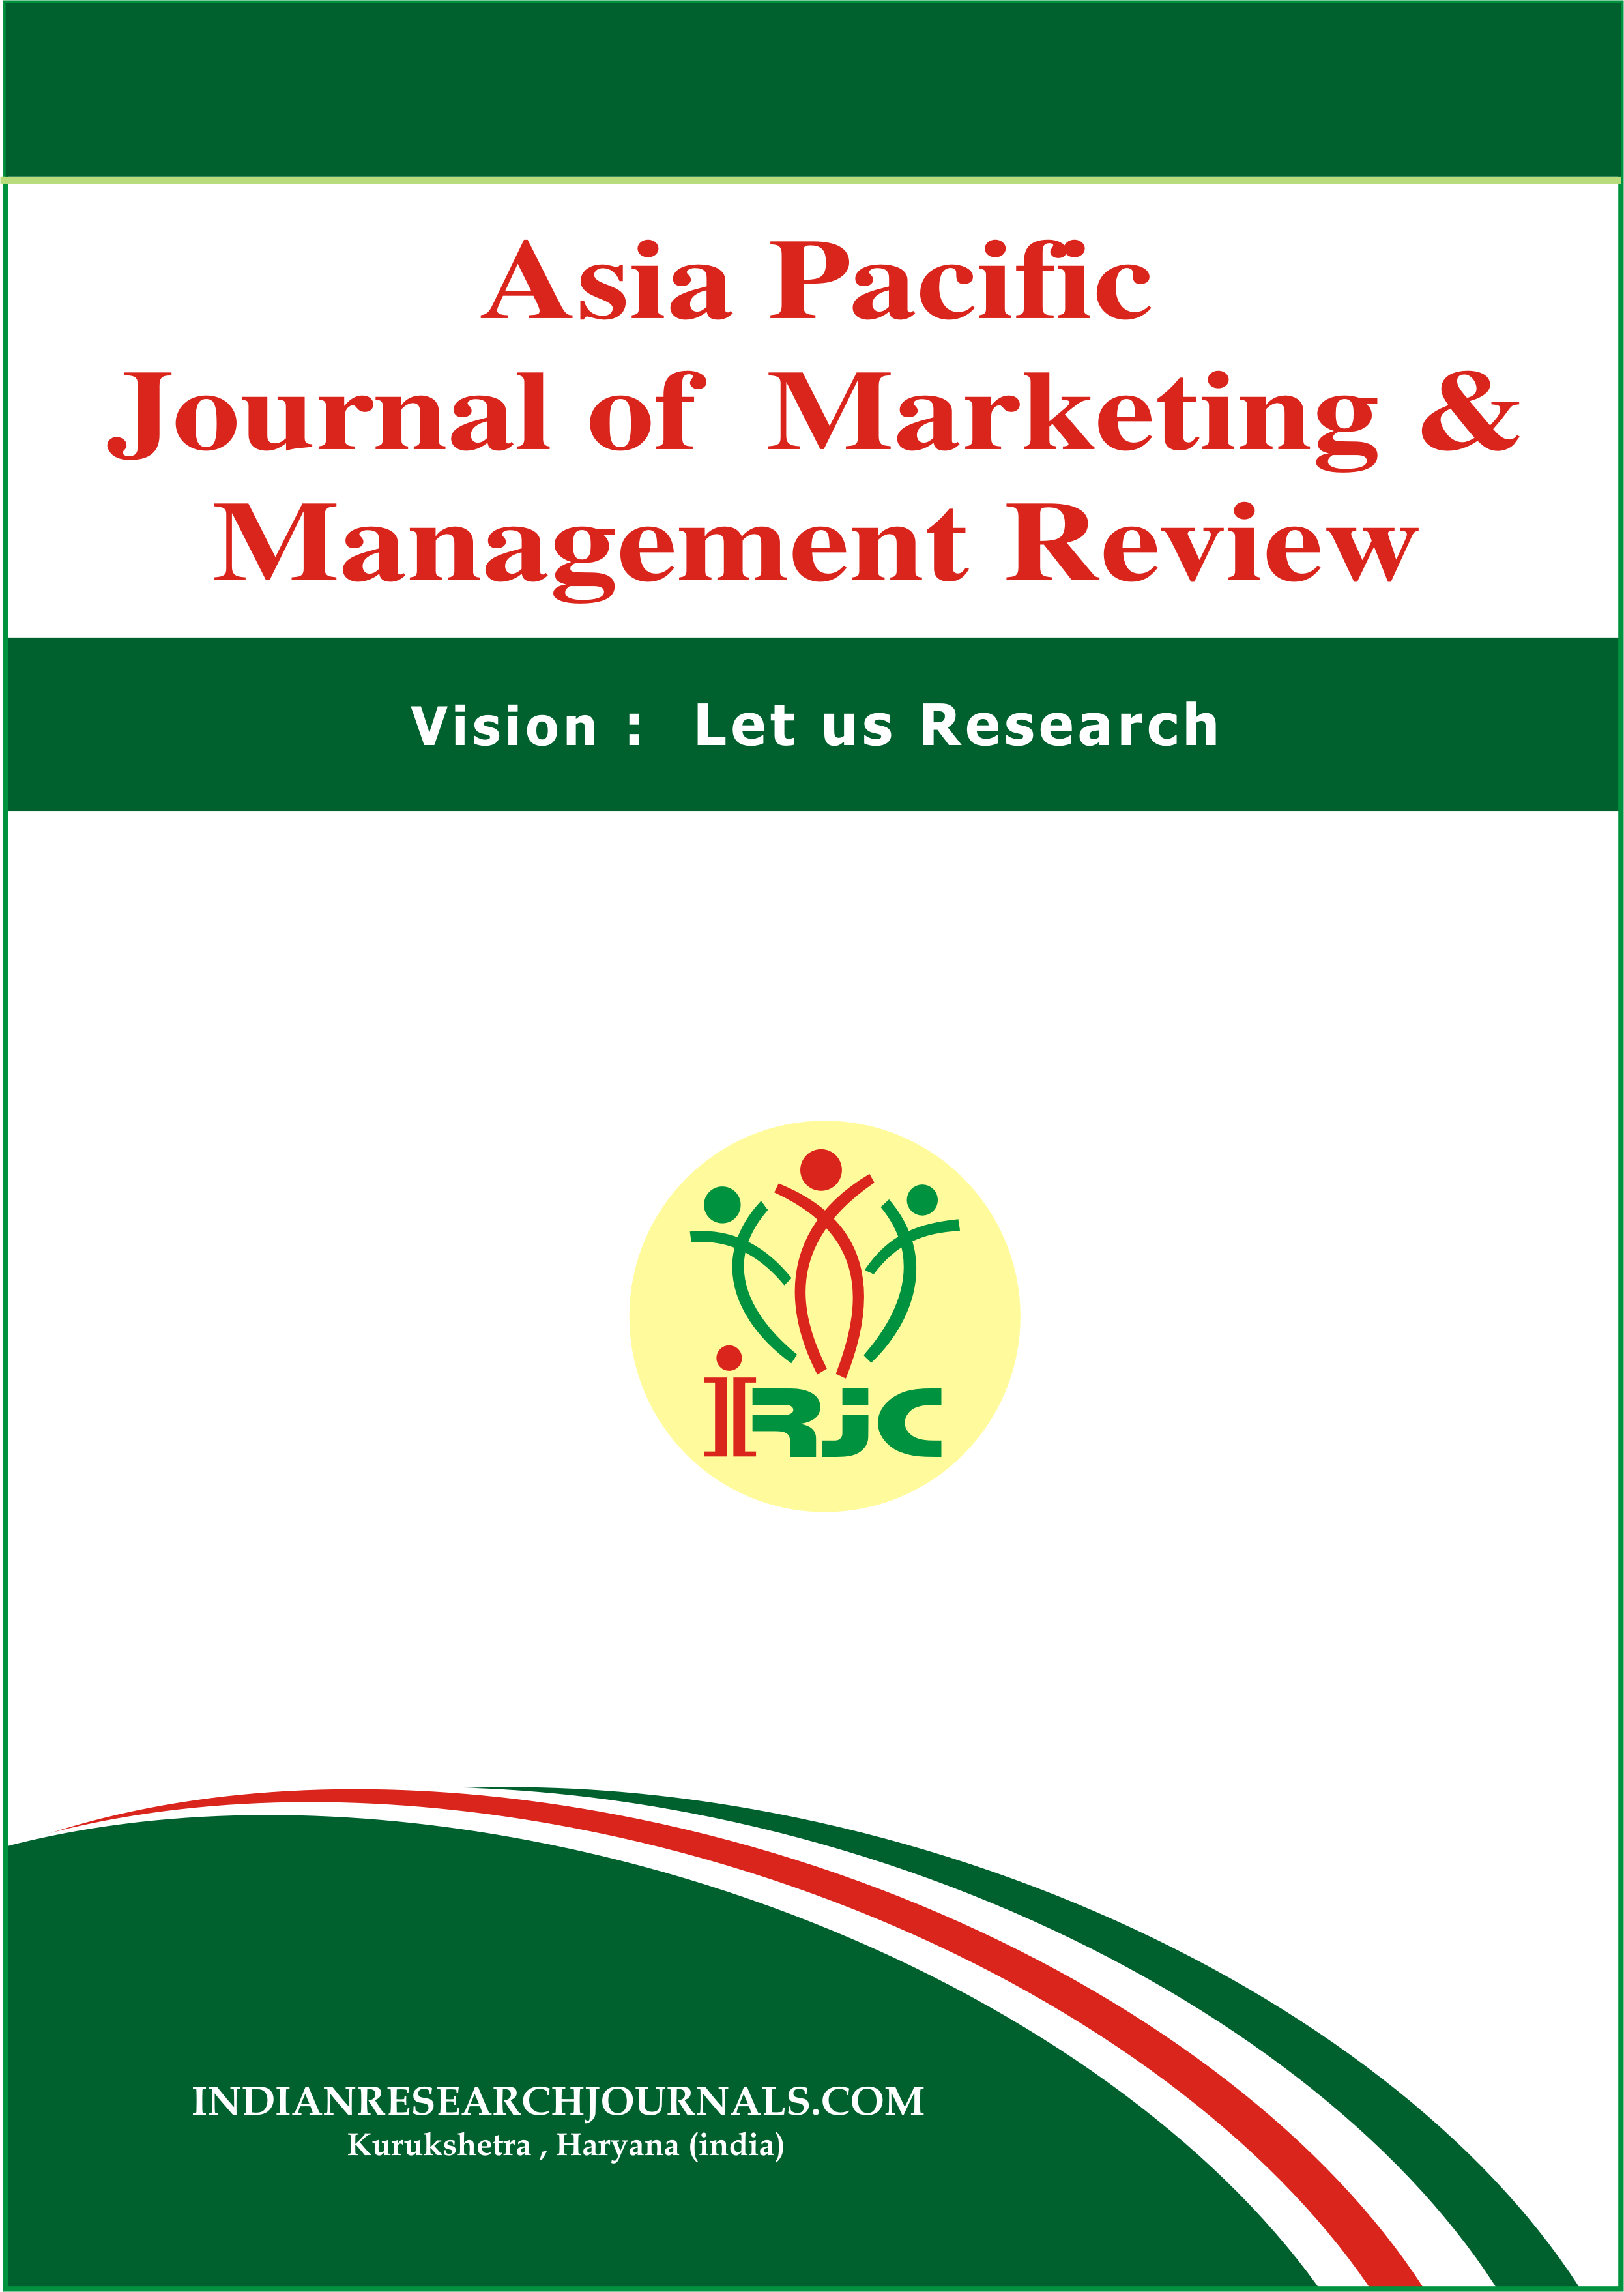 					View Vol. 12 No. 01 (2023): ASIA PACIFIC JOURNAL OF MARKETING & MANAGEMENT REVIEW
				